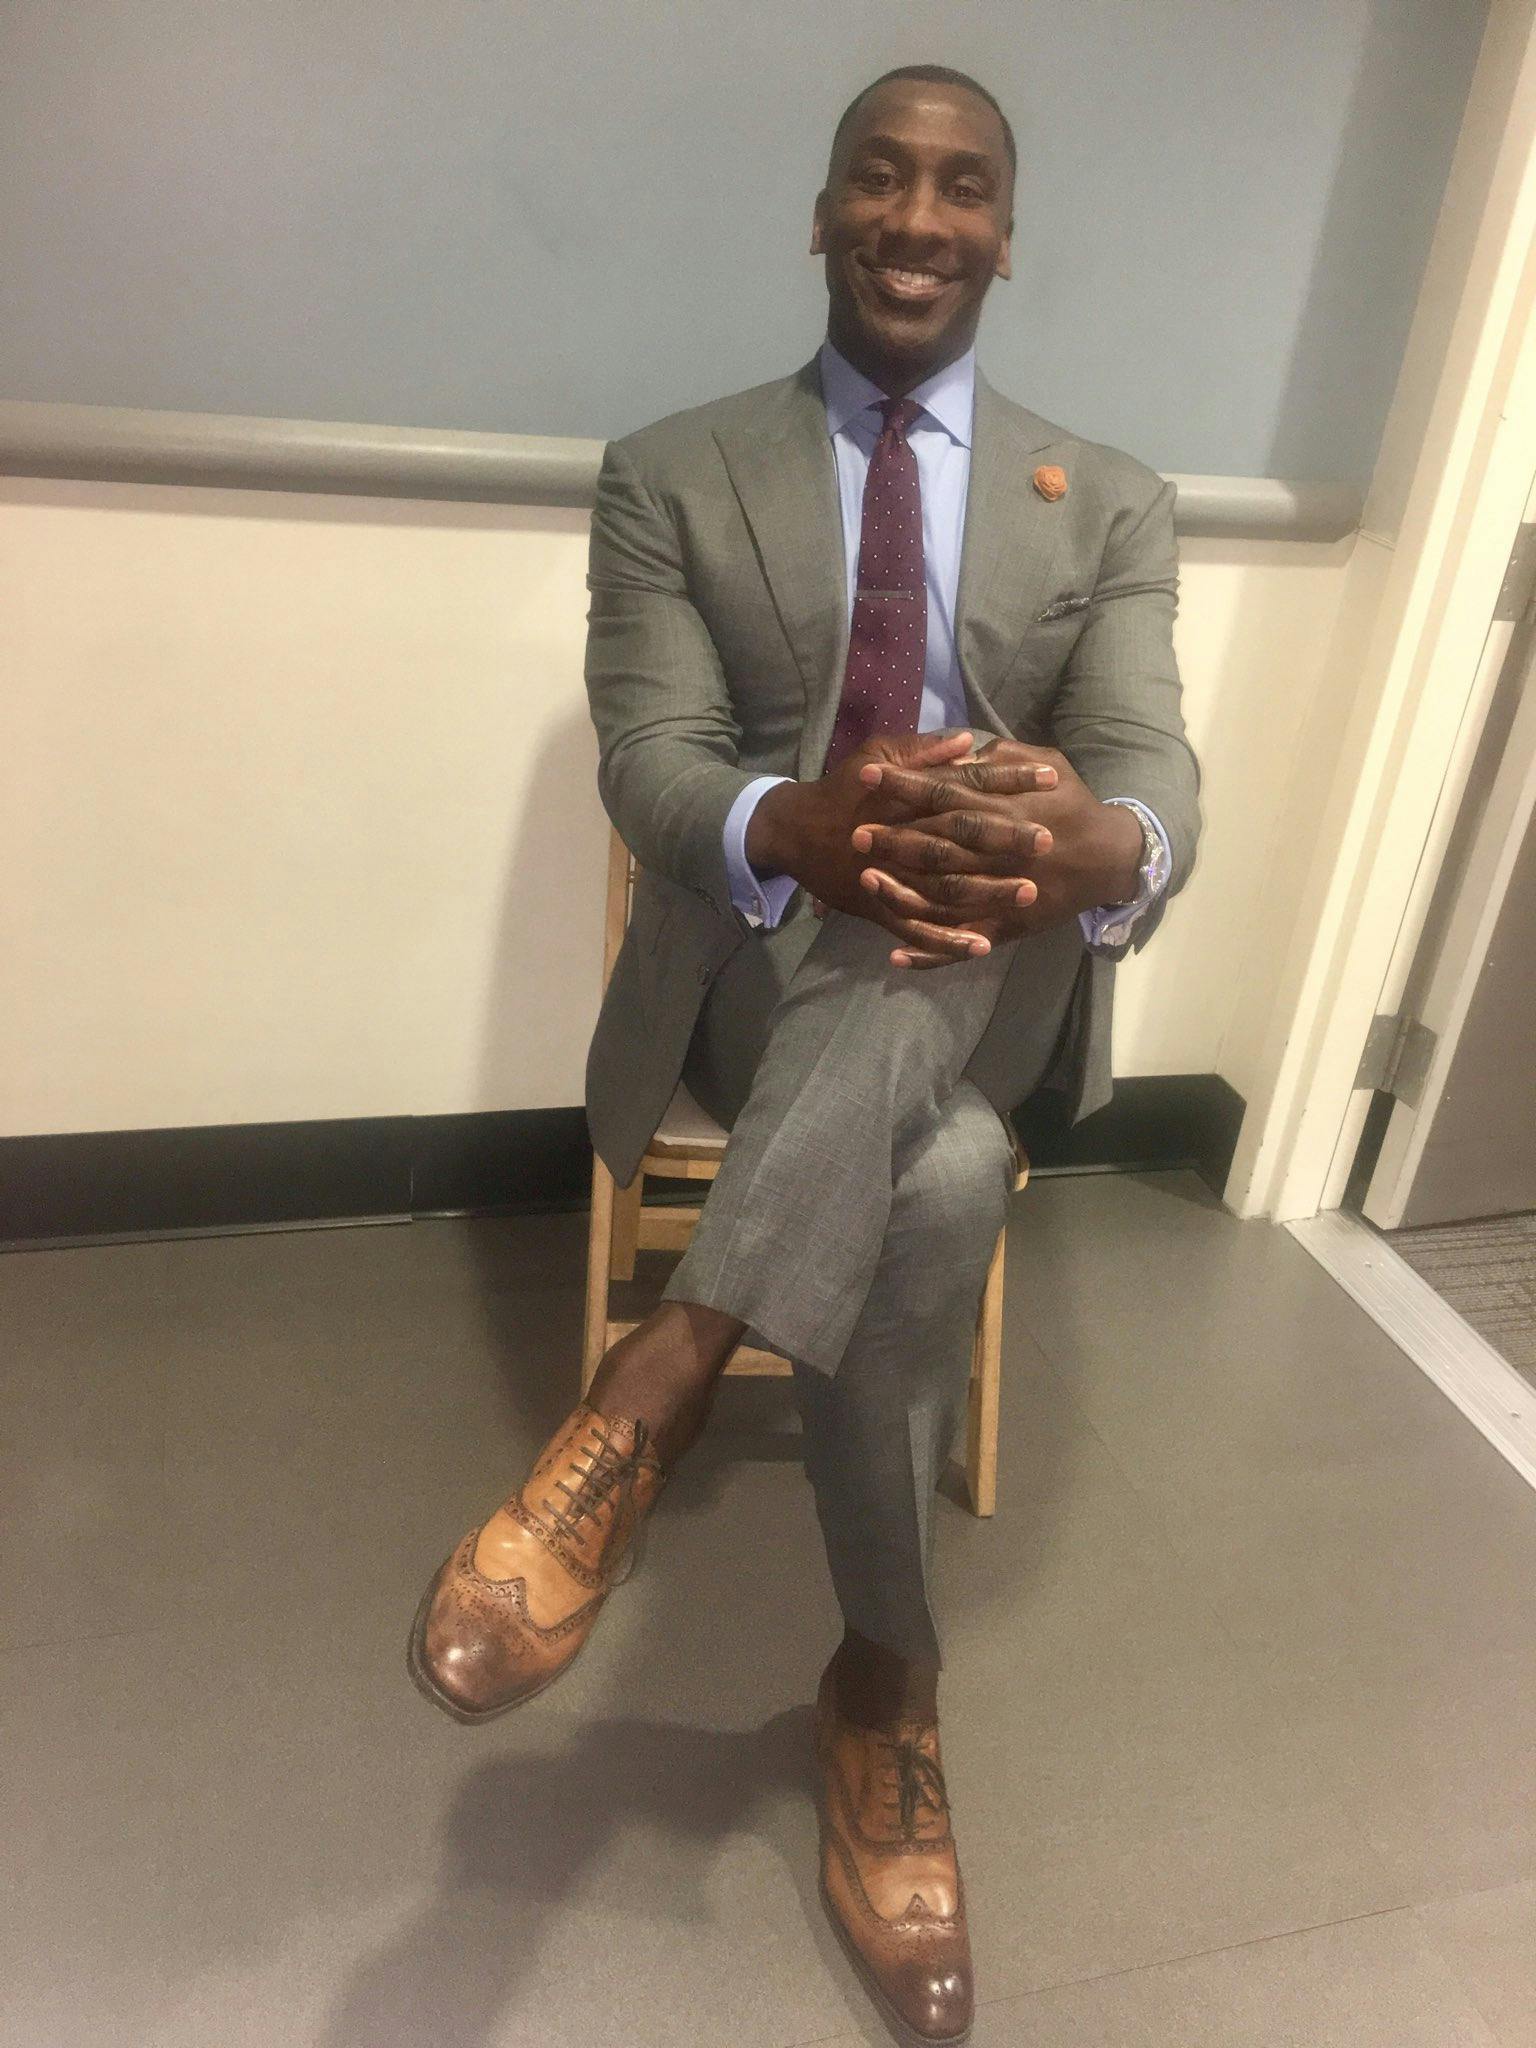 Shannon Sharpe meme - Sharpe seated wearing a suit